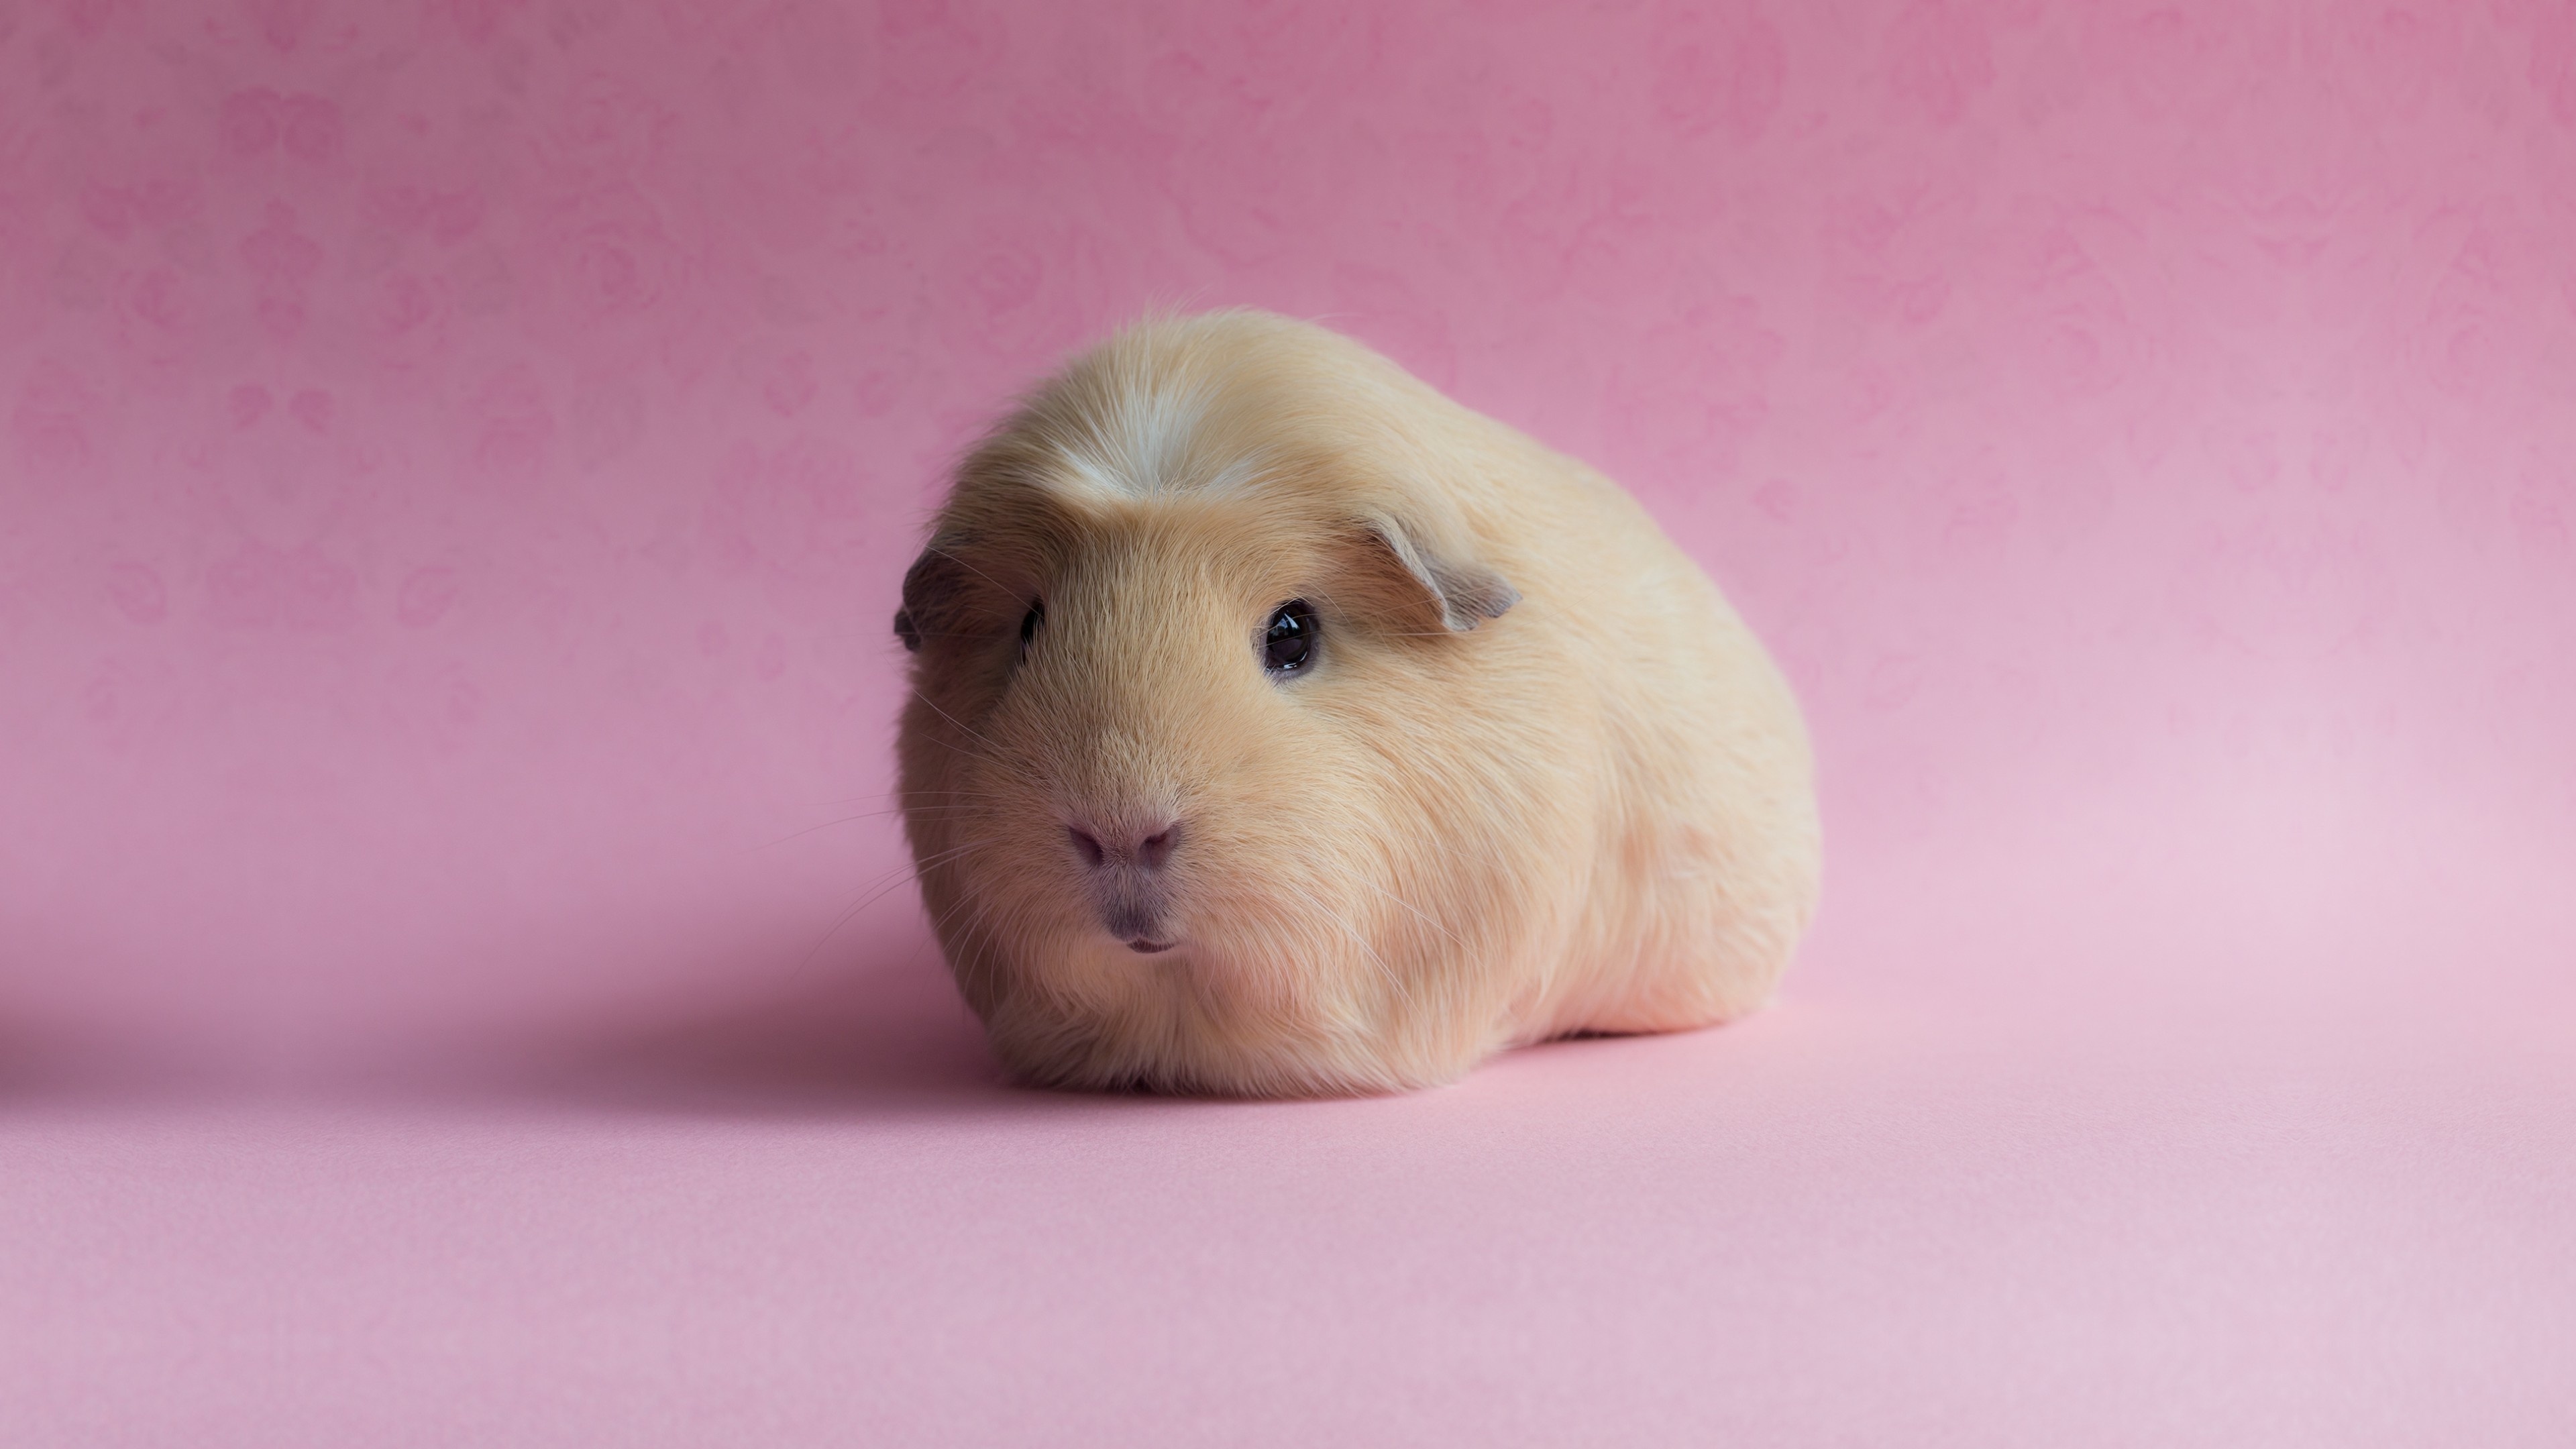 Guinea Pig, Funny animals, Small pets, Colorful wallpapers, 3840x2160 4K Desktop